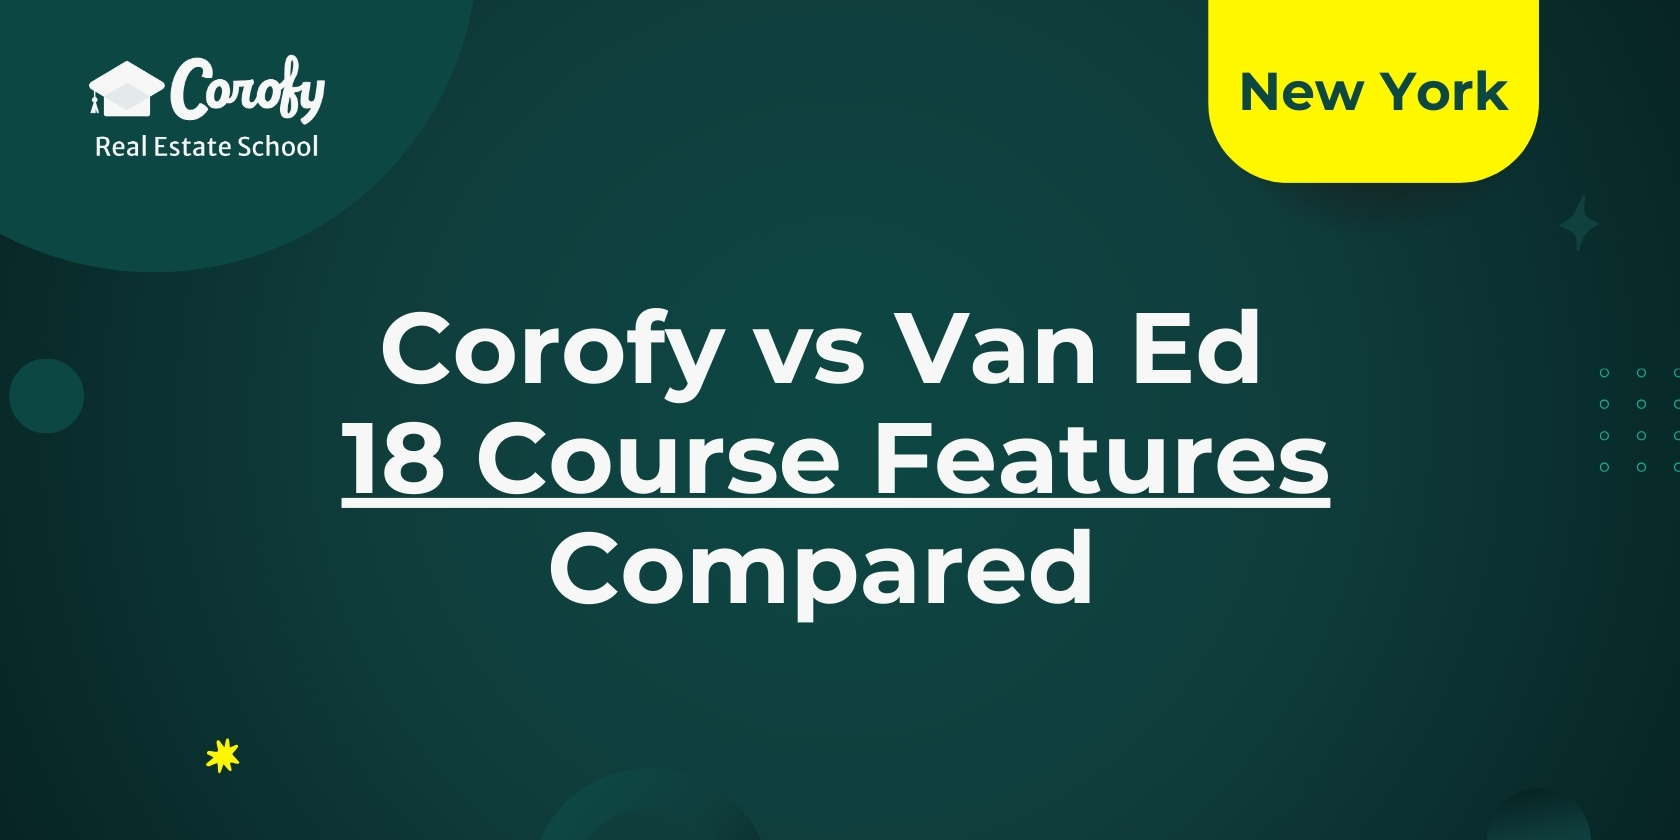 Corofy vs Van Ed - 18 Course Features Compared | Corofy